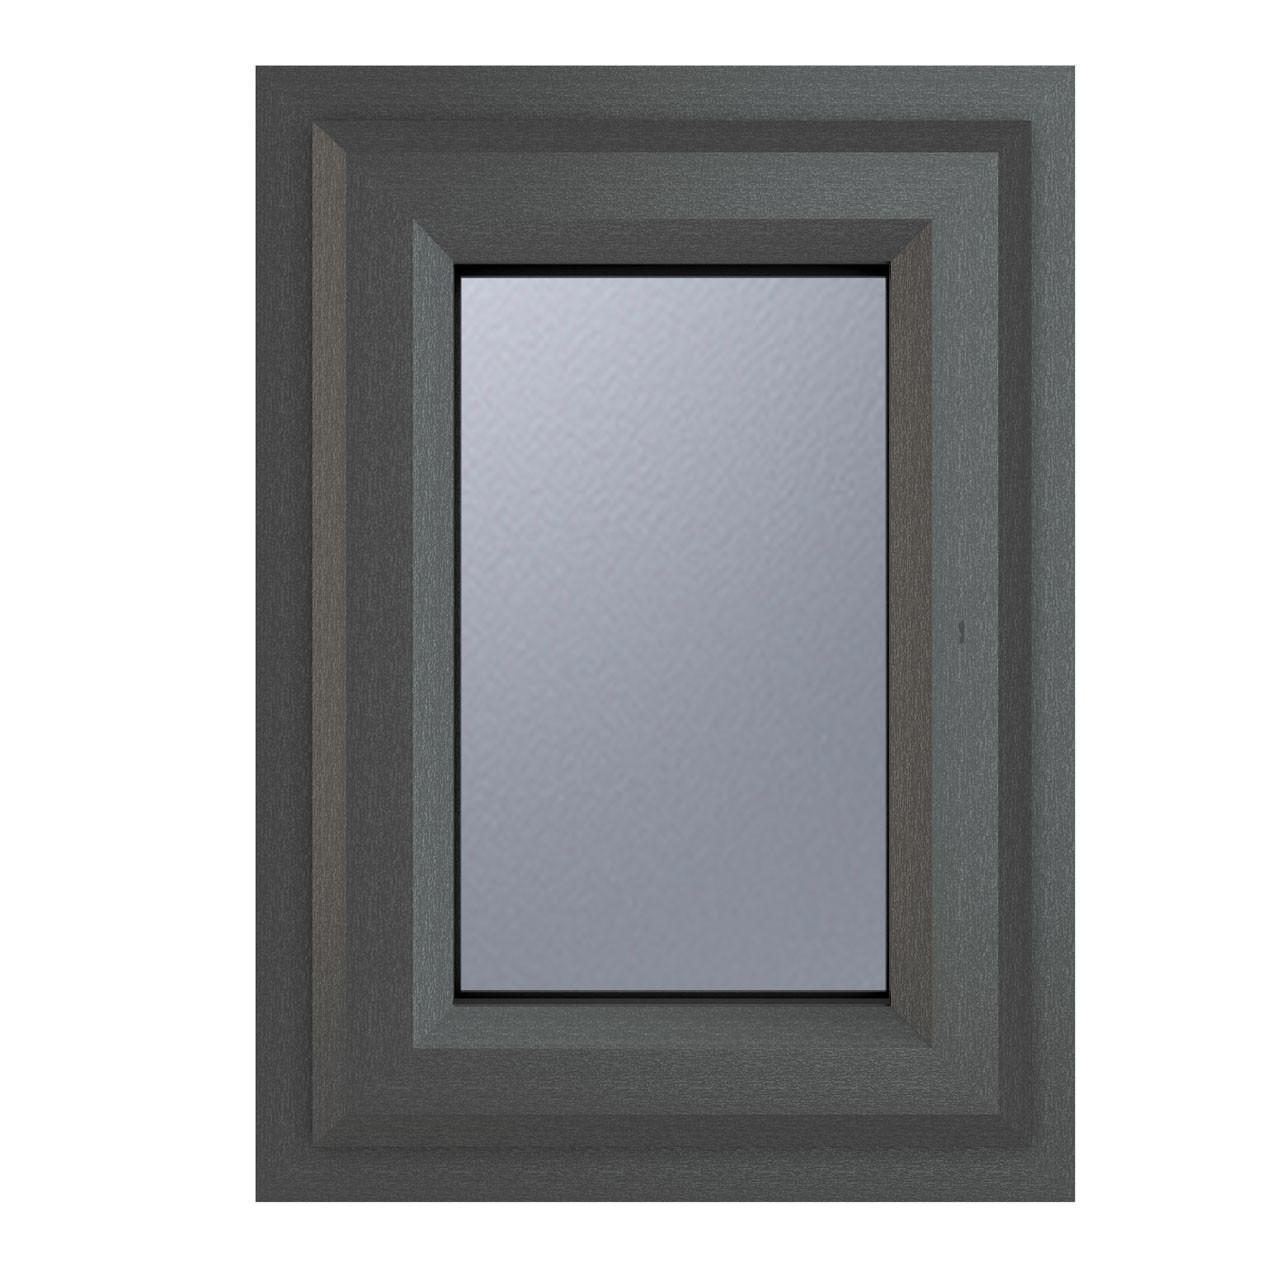 Photograph of Crystal uPVC Window Grey 7016 external White Internal A Rated Top opener 610mm x 610mm Obscure Glazing